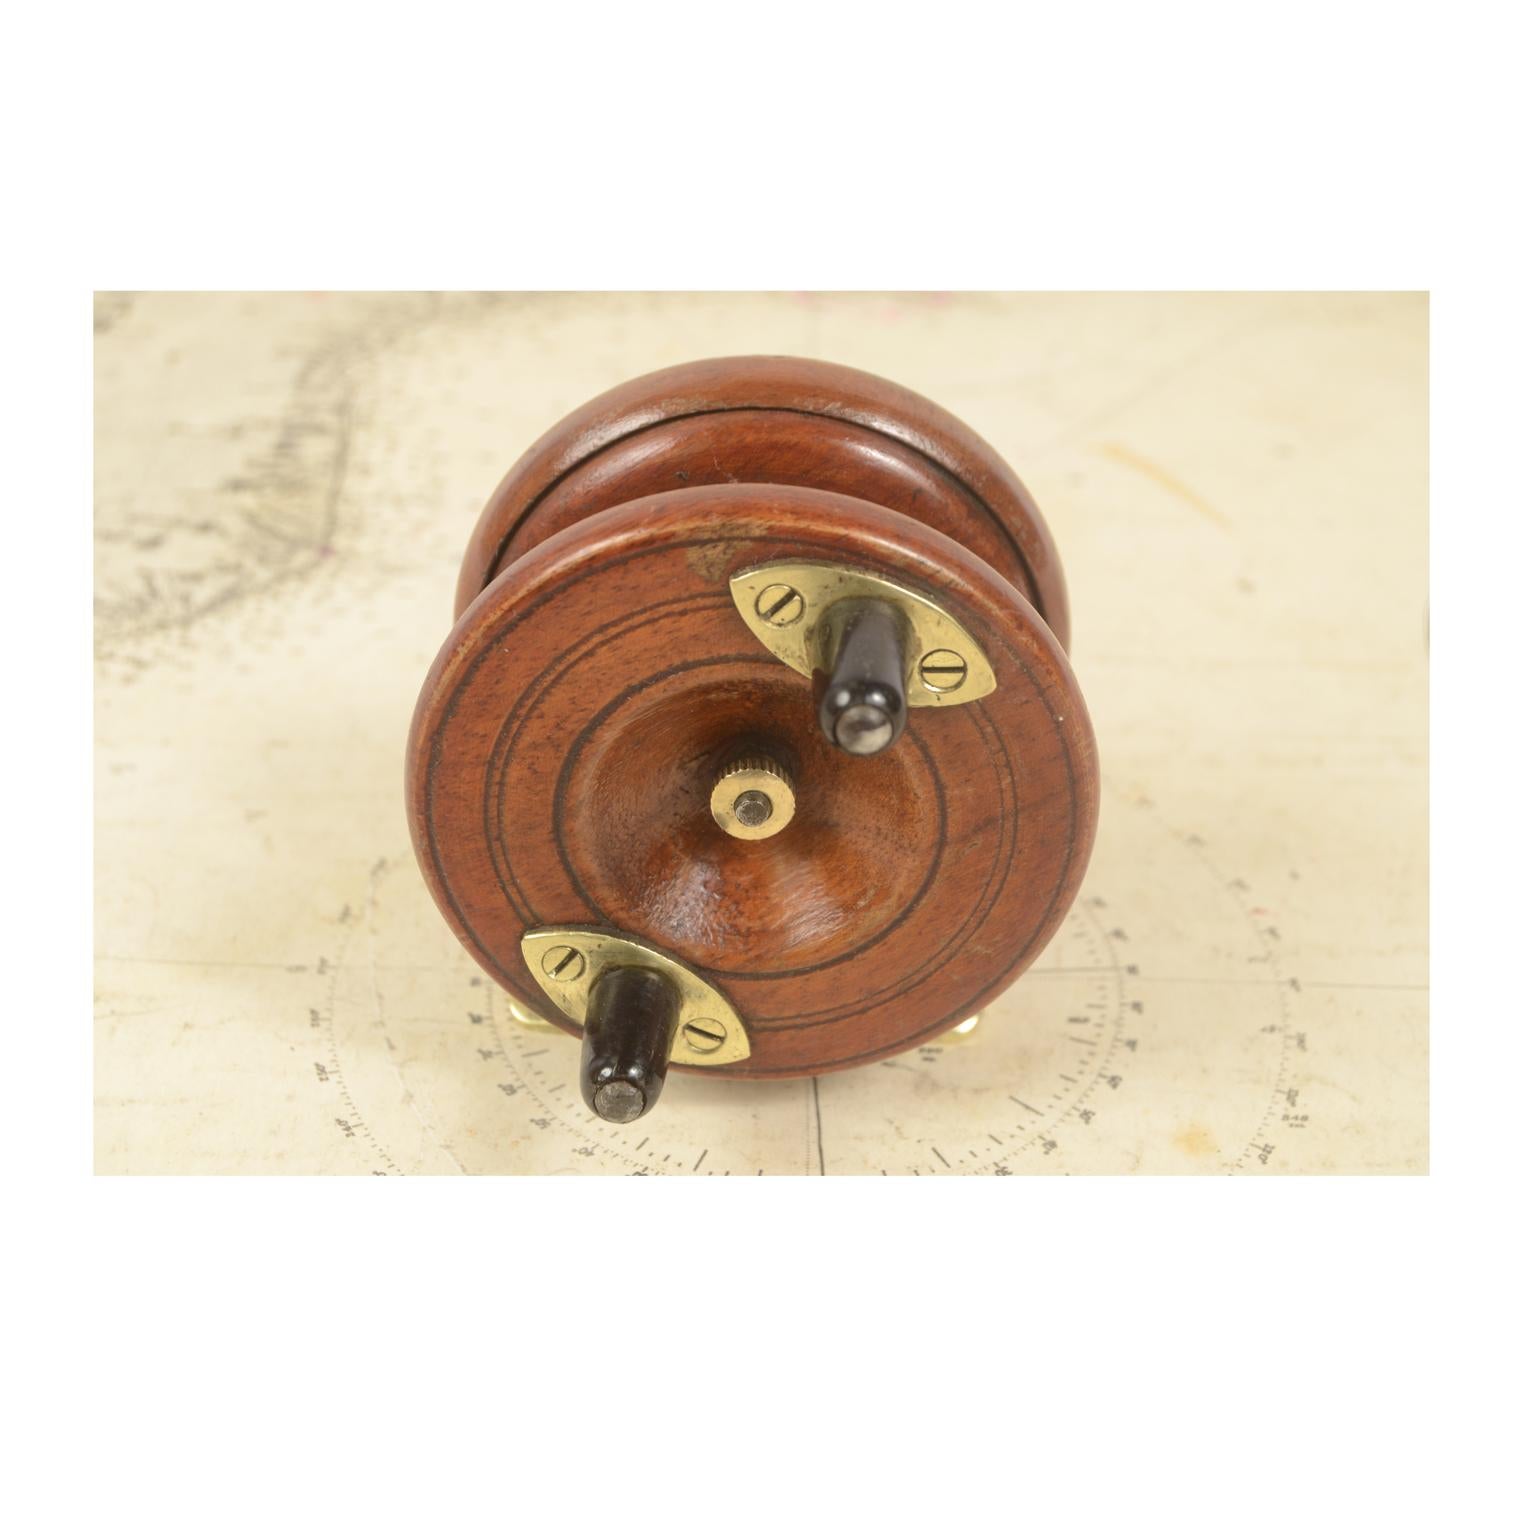 British Fishing Reel Made of Turned Oak and Brass, UK, Early 1900s